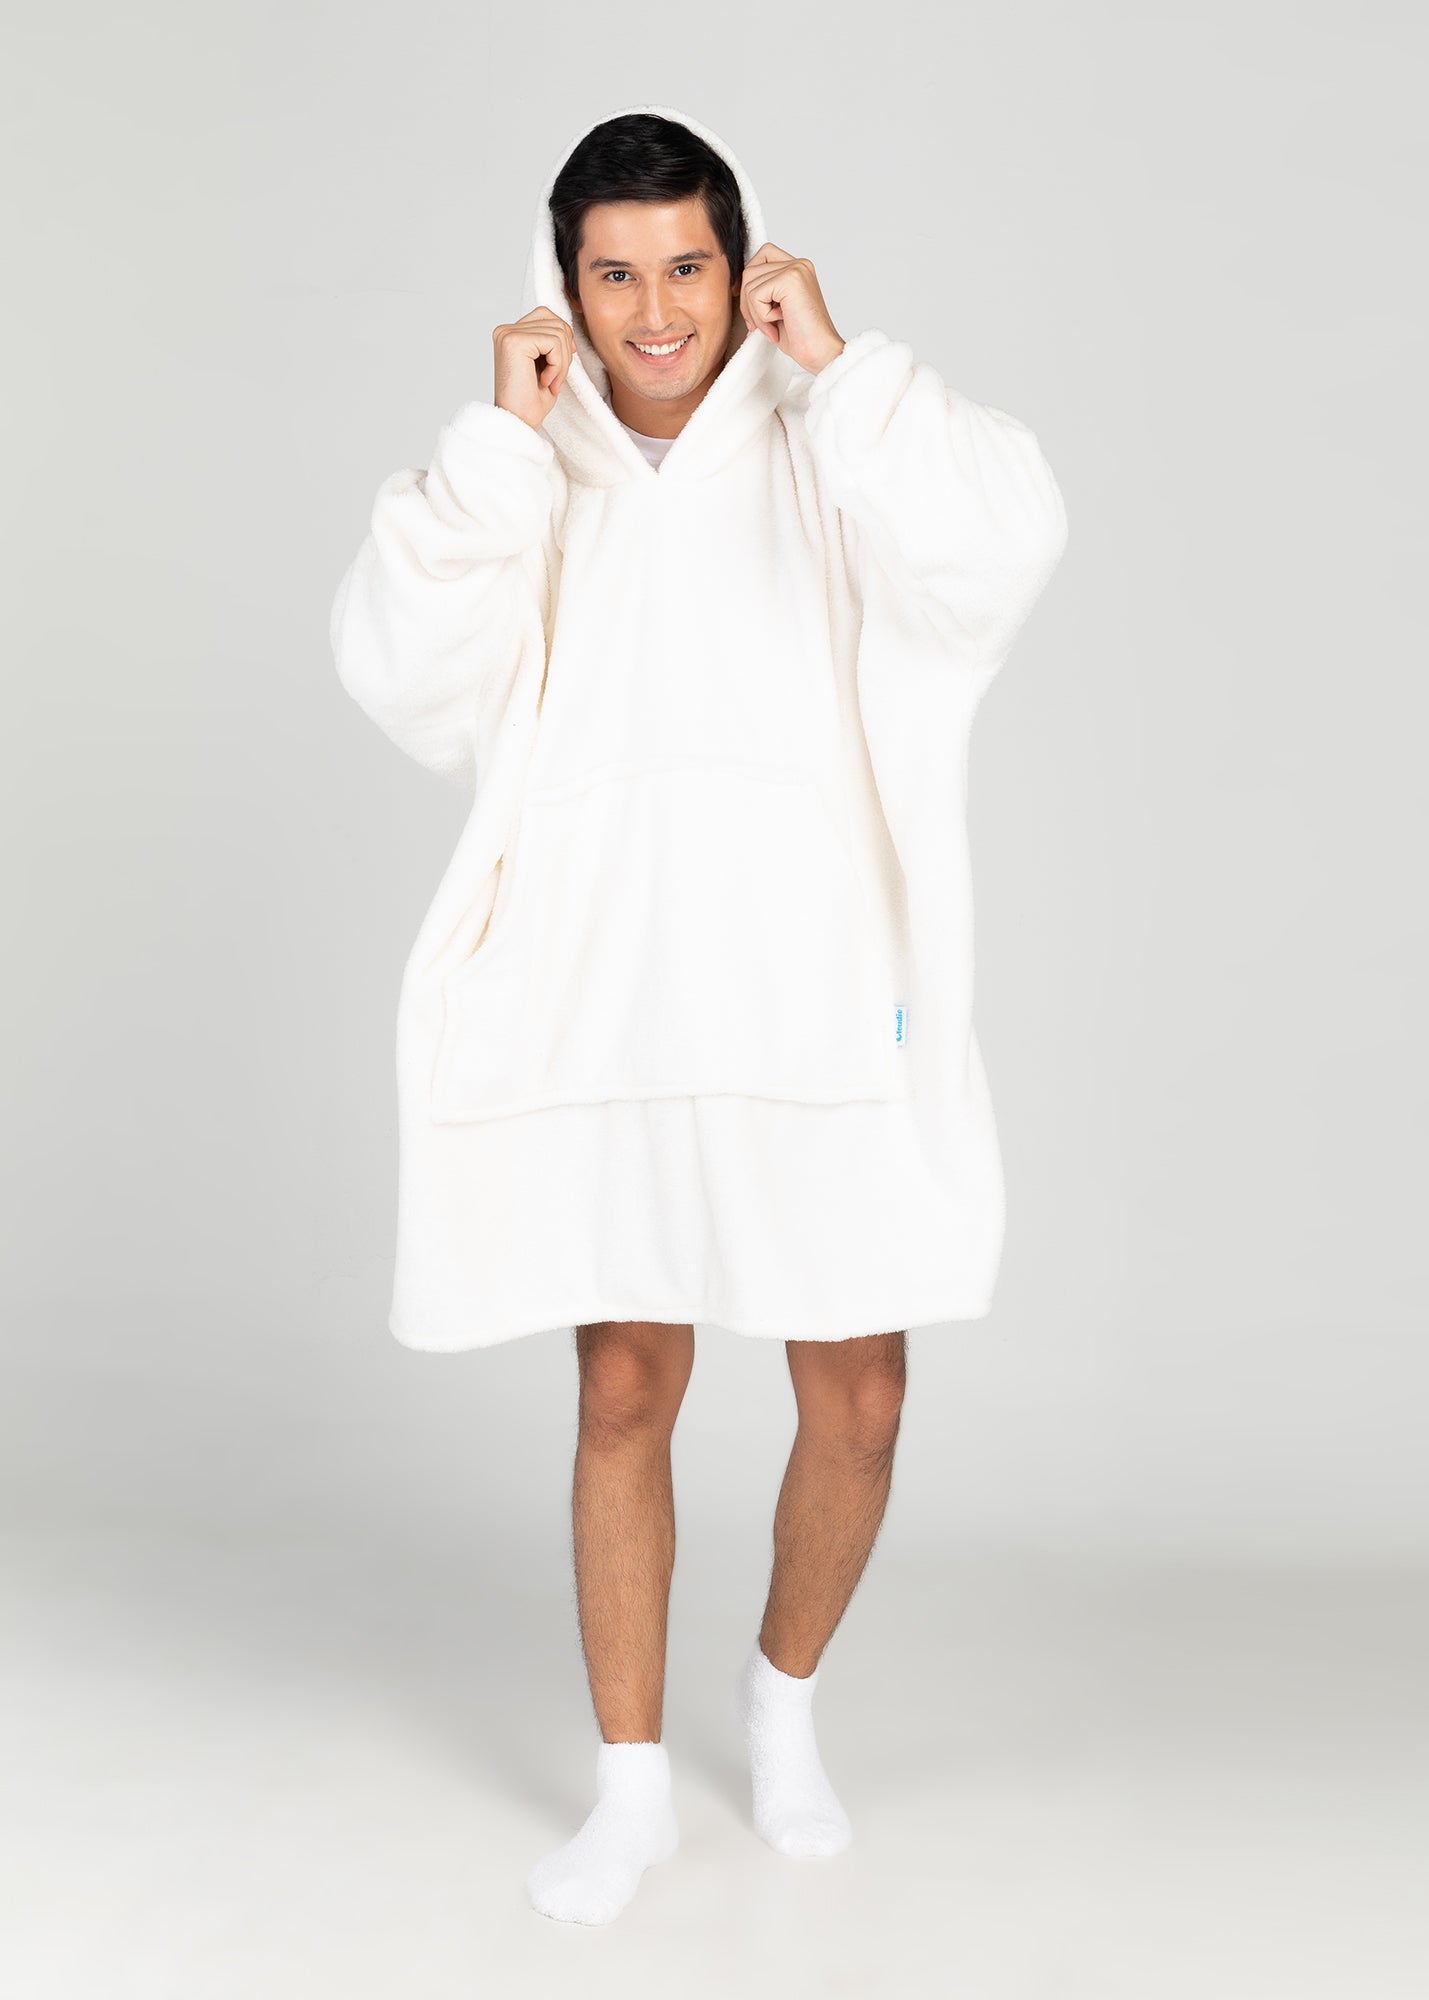 White Luxe - extra thick - The Cloudie Co. ultra soft cosy comfy Giant Wearable Blanket hoodie Unisex home or travel blanket hoodie travel blanket sofa blanket with sleeves hoodie blanket